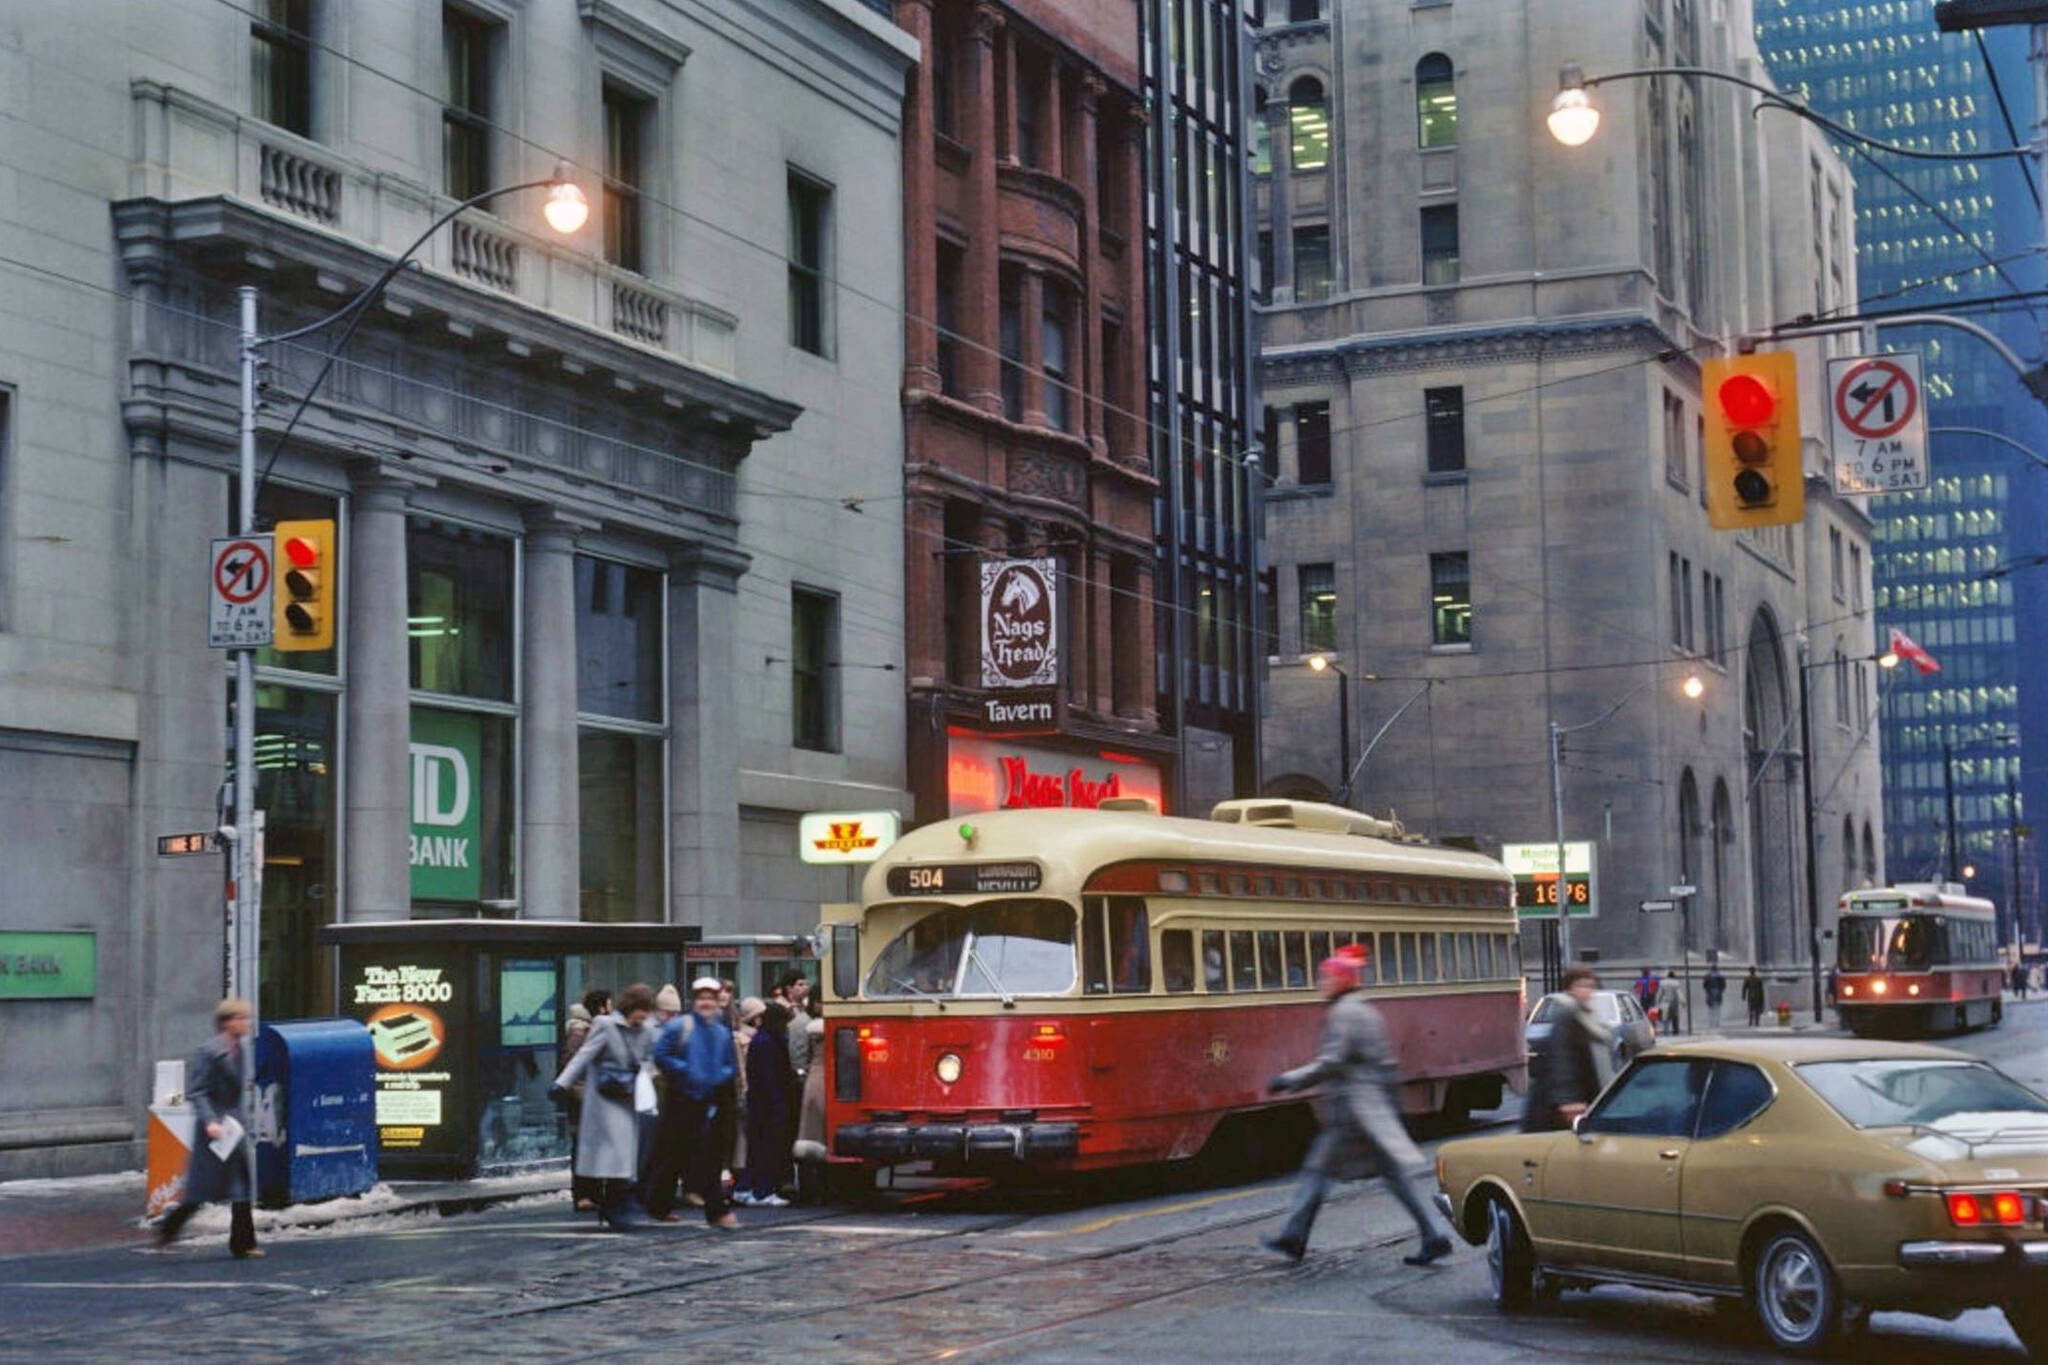 20171220-king-streetcar-1980s-ed.jpg?w=2048&cmd=resize_then_crop&height=1365&quality=70